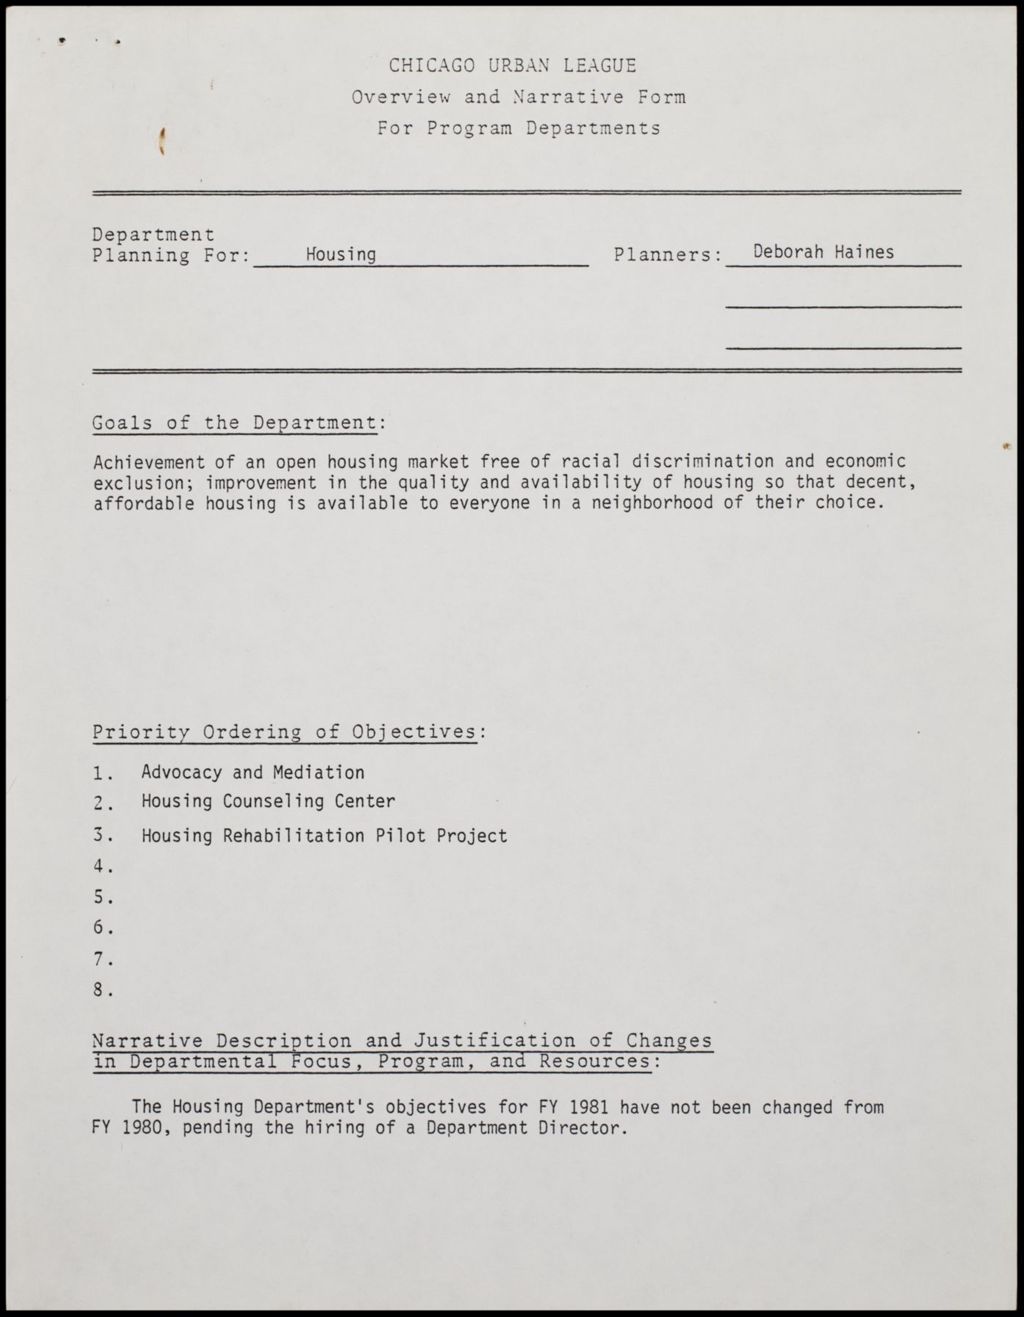 Overview and Narrative Form, 1980 (Folder II-1770)